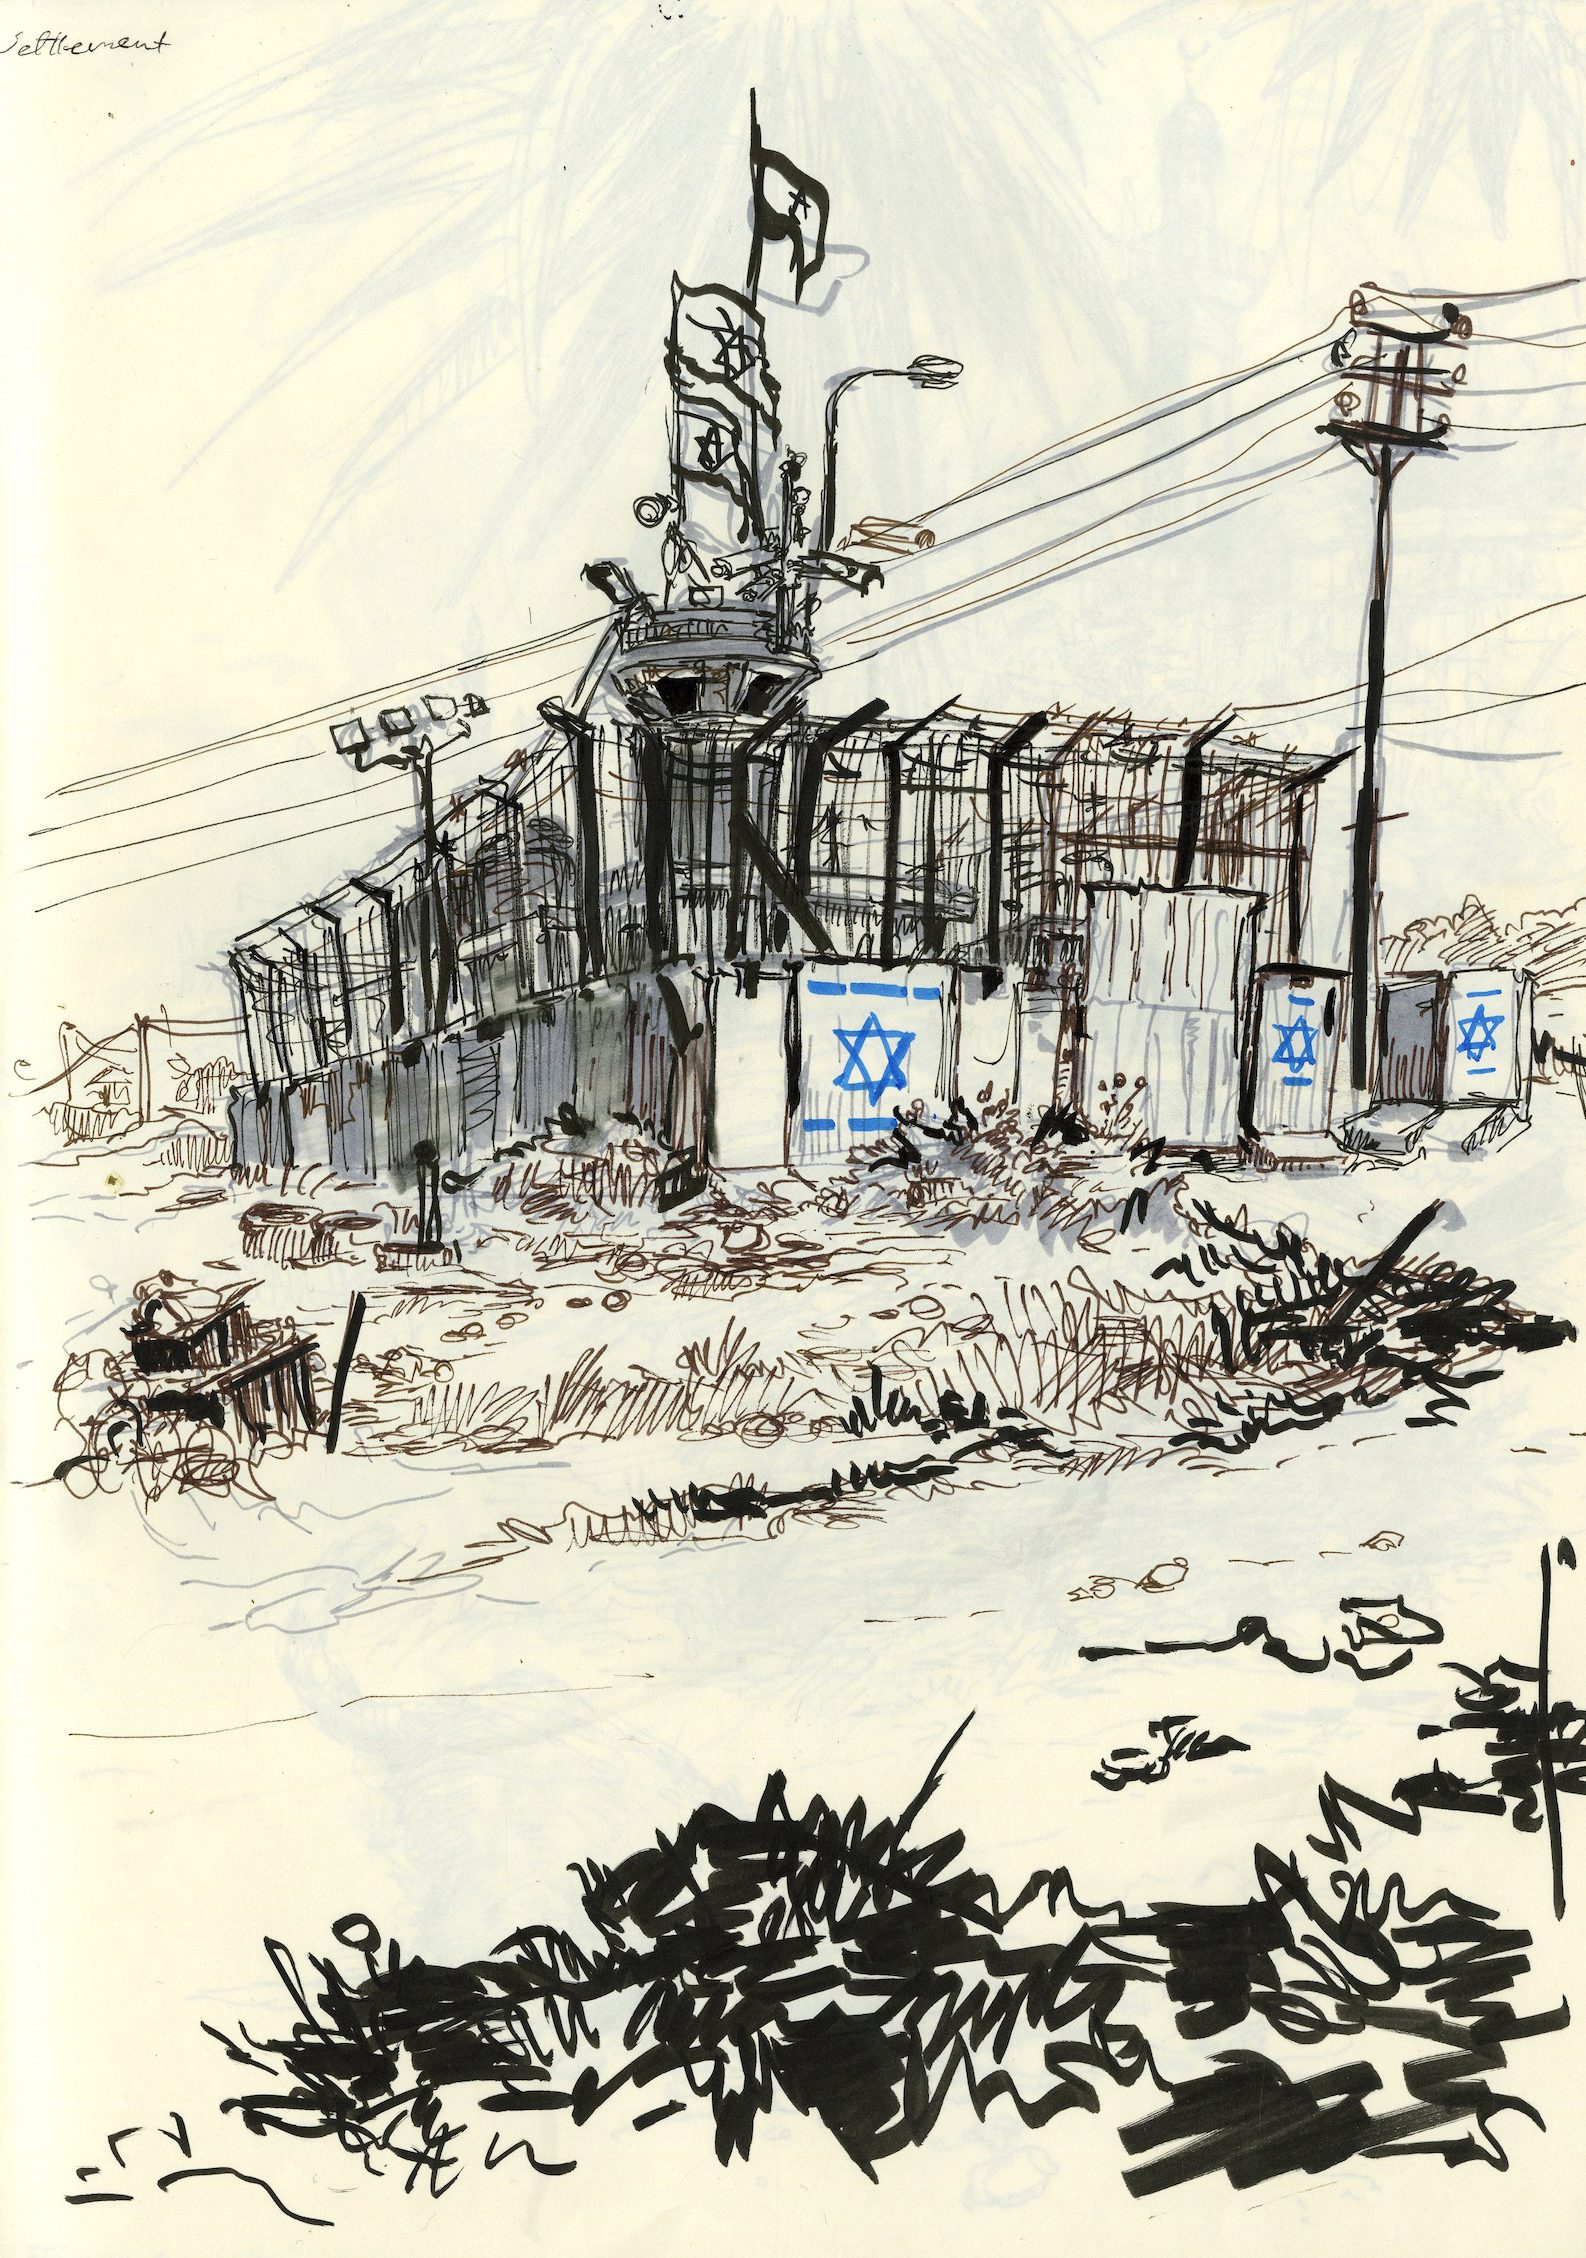 Drawing of an Israeli settlement seen from afar, surrounded by walls and barbed wire and festooned with the Israeli flag